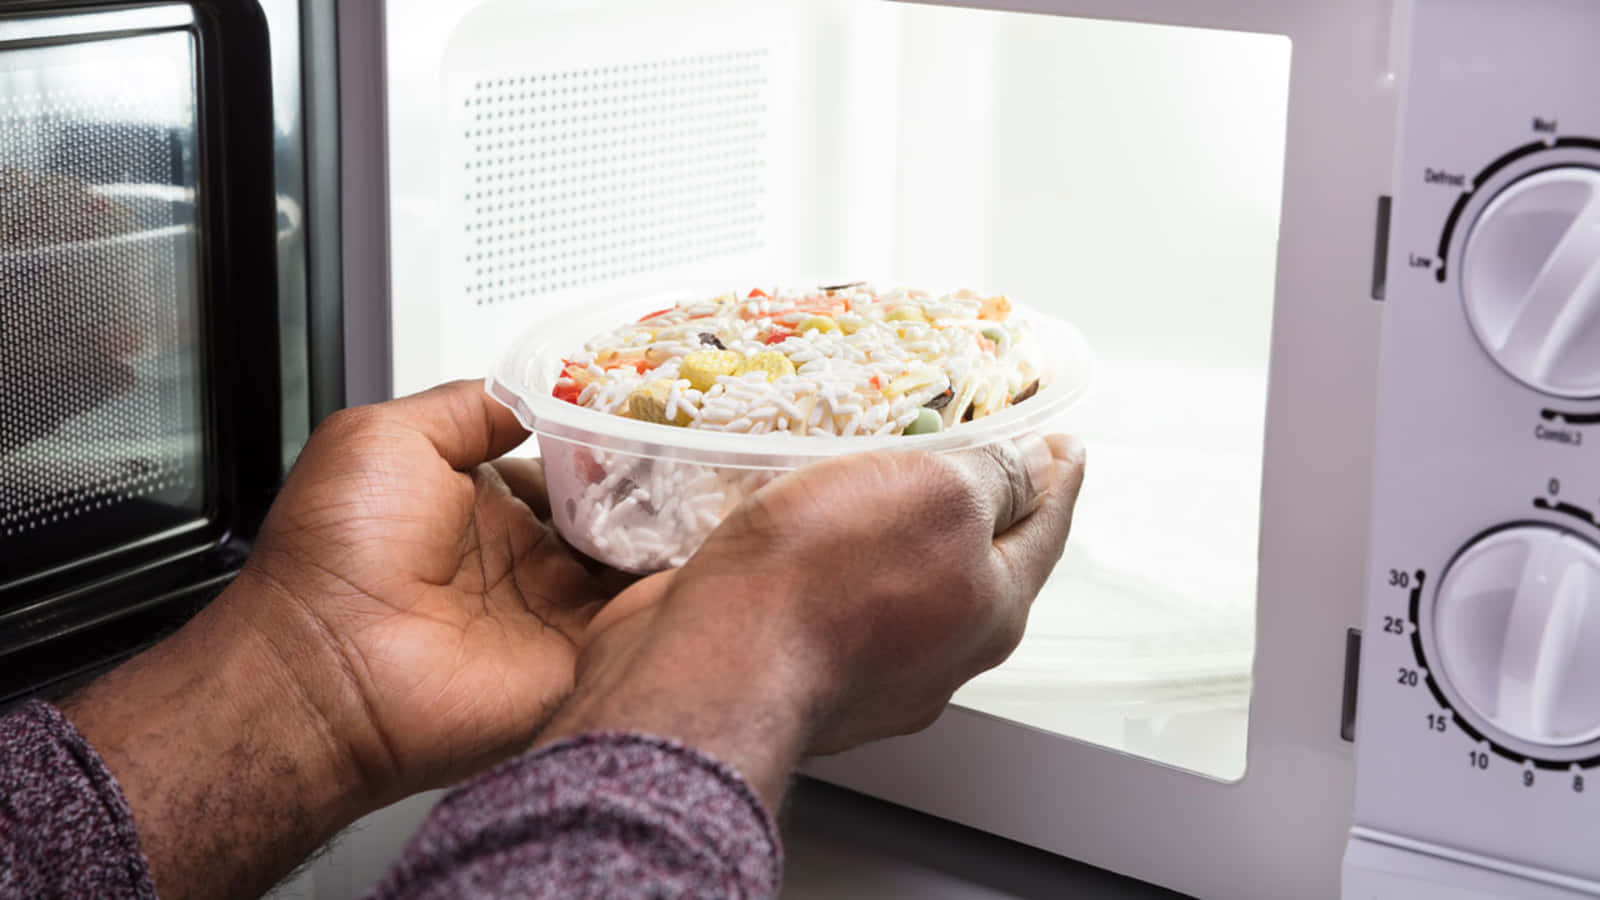 Enjoy a Delicious Meal in Minutes with This Microwave